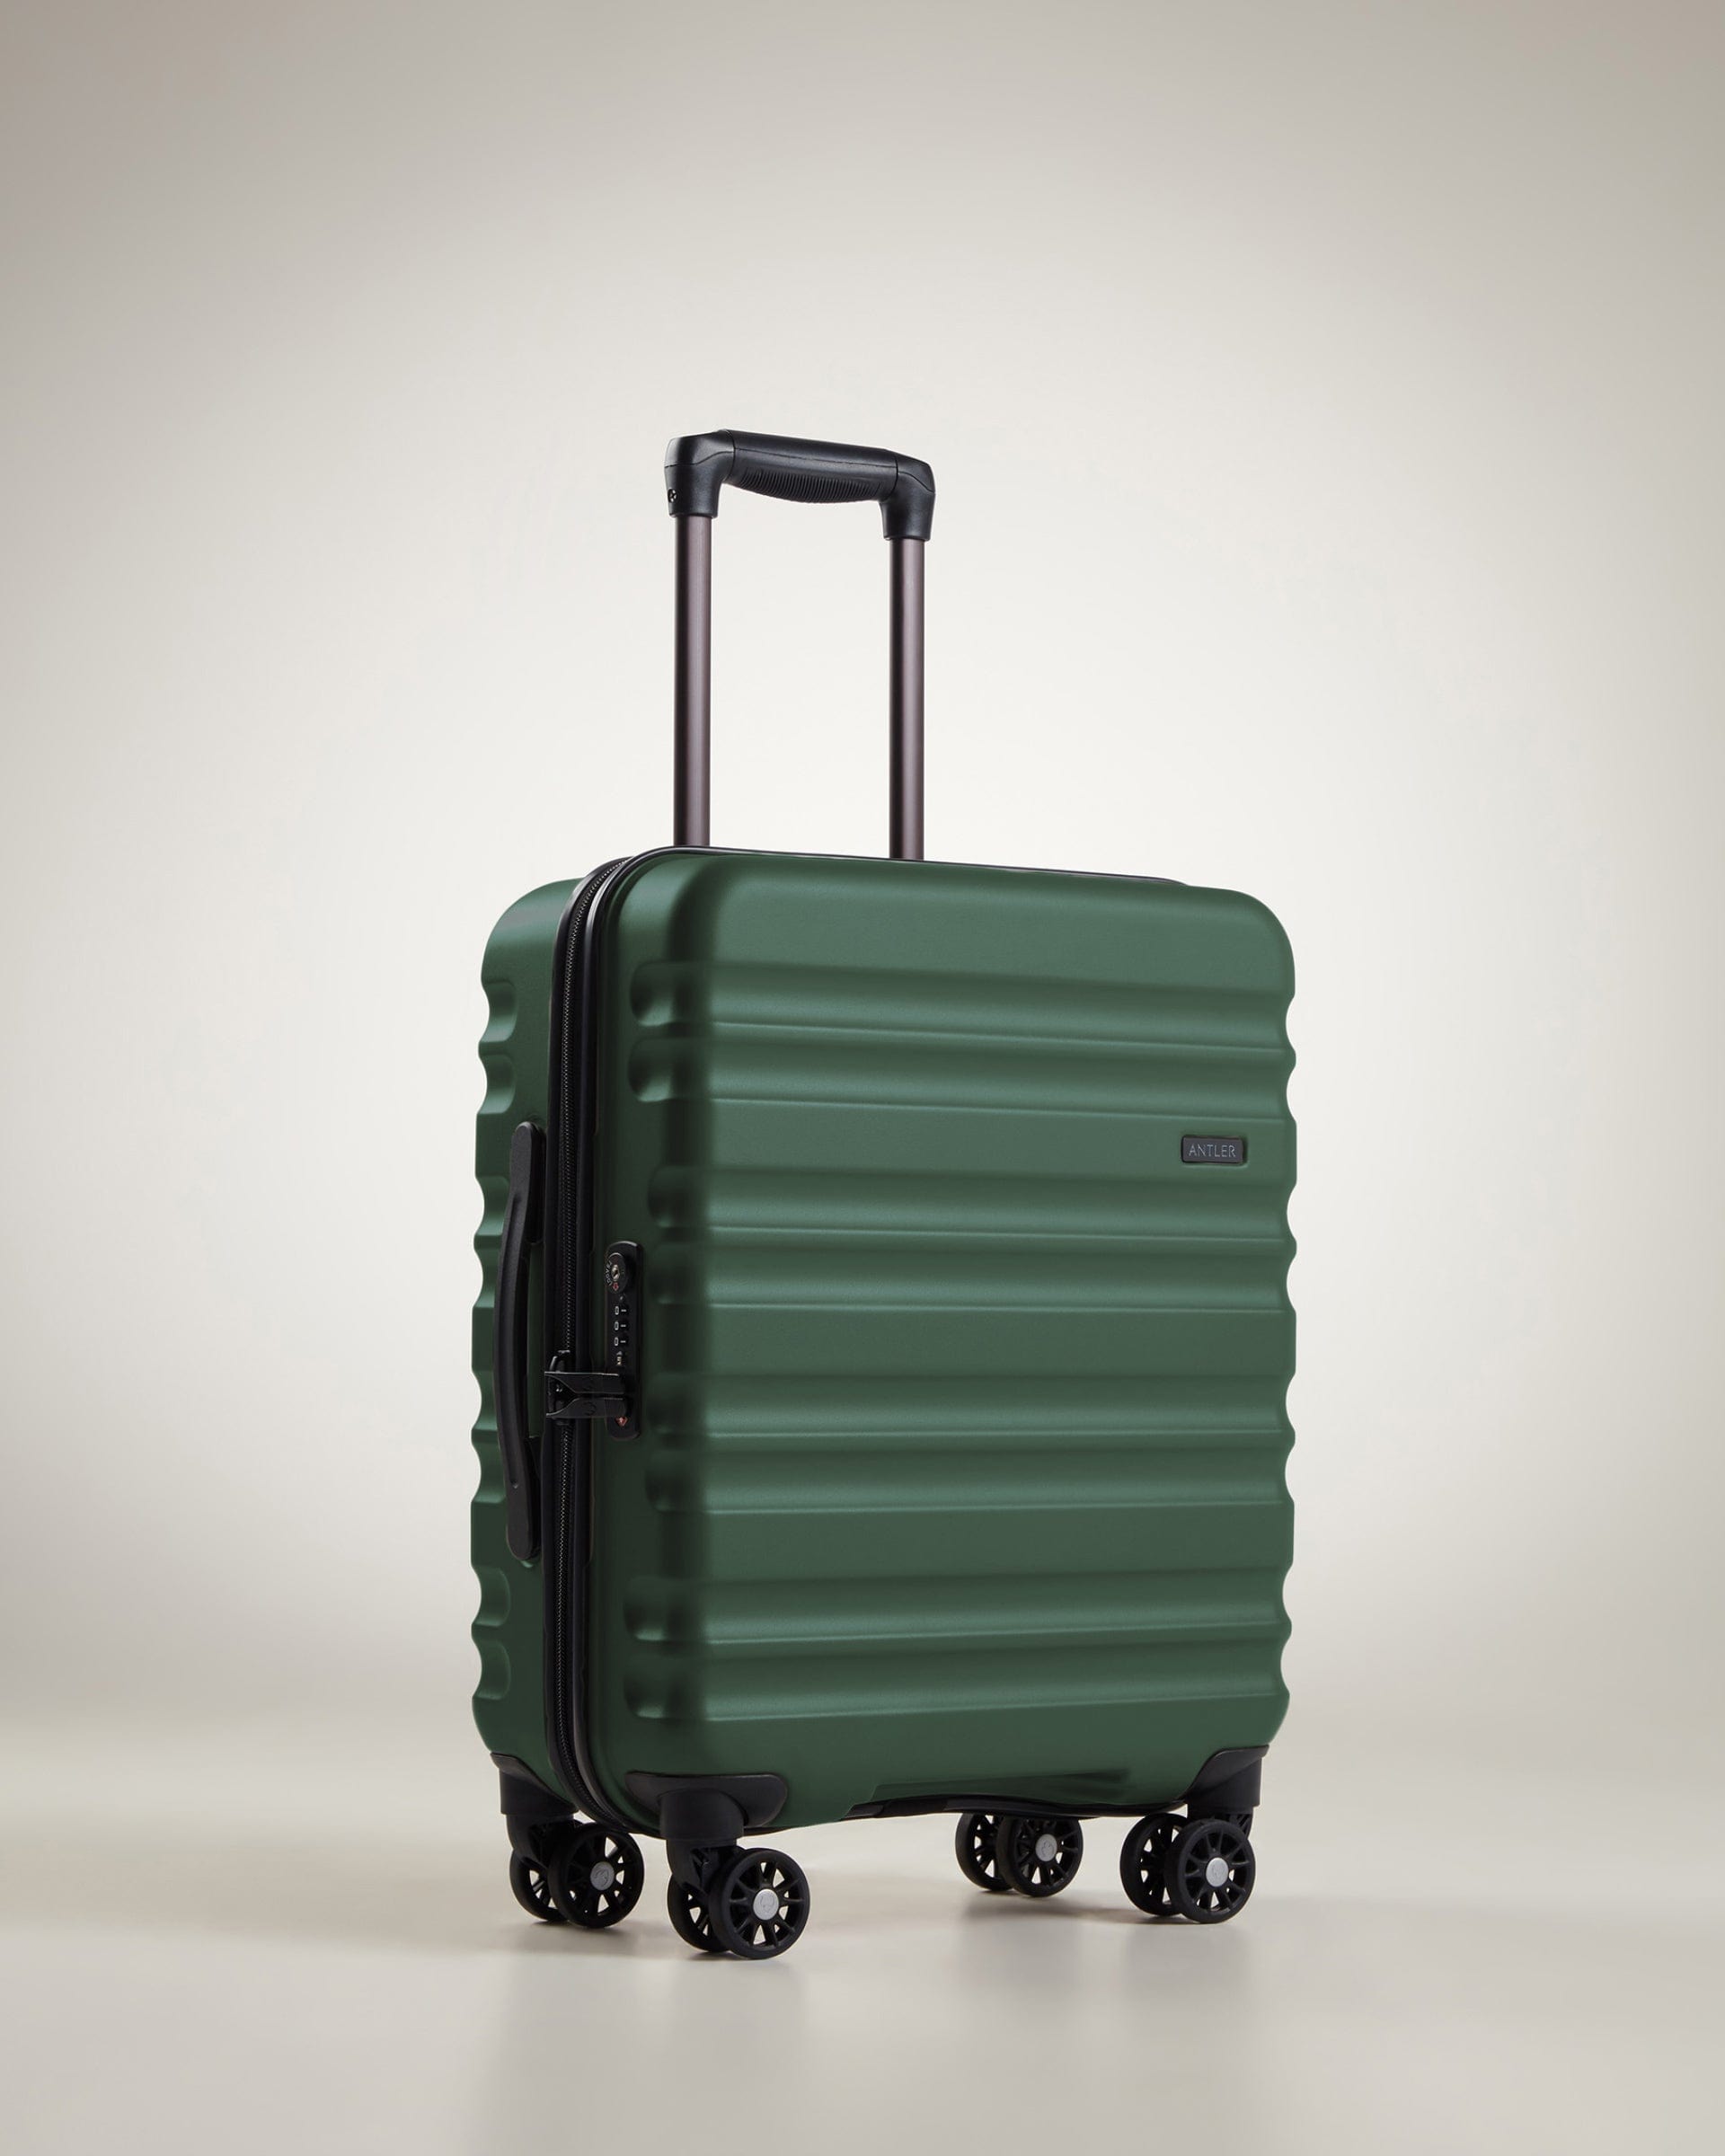 View Antler Clifton Cabin Suitcase In Woodland Green Size 55cm x 40cm x 20cm information